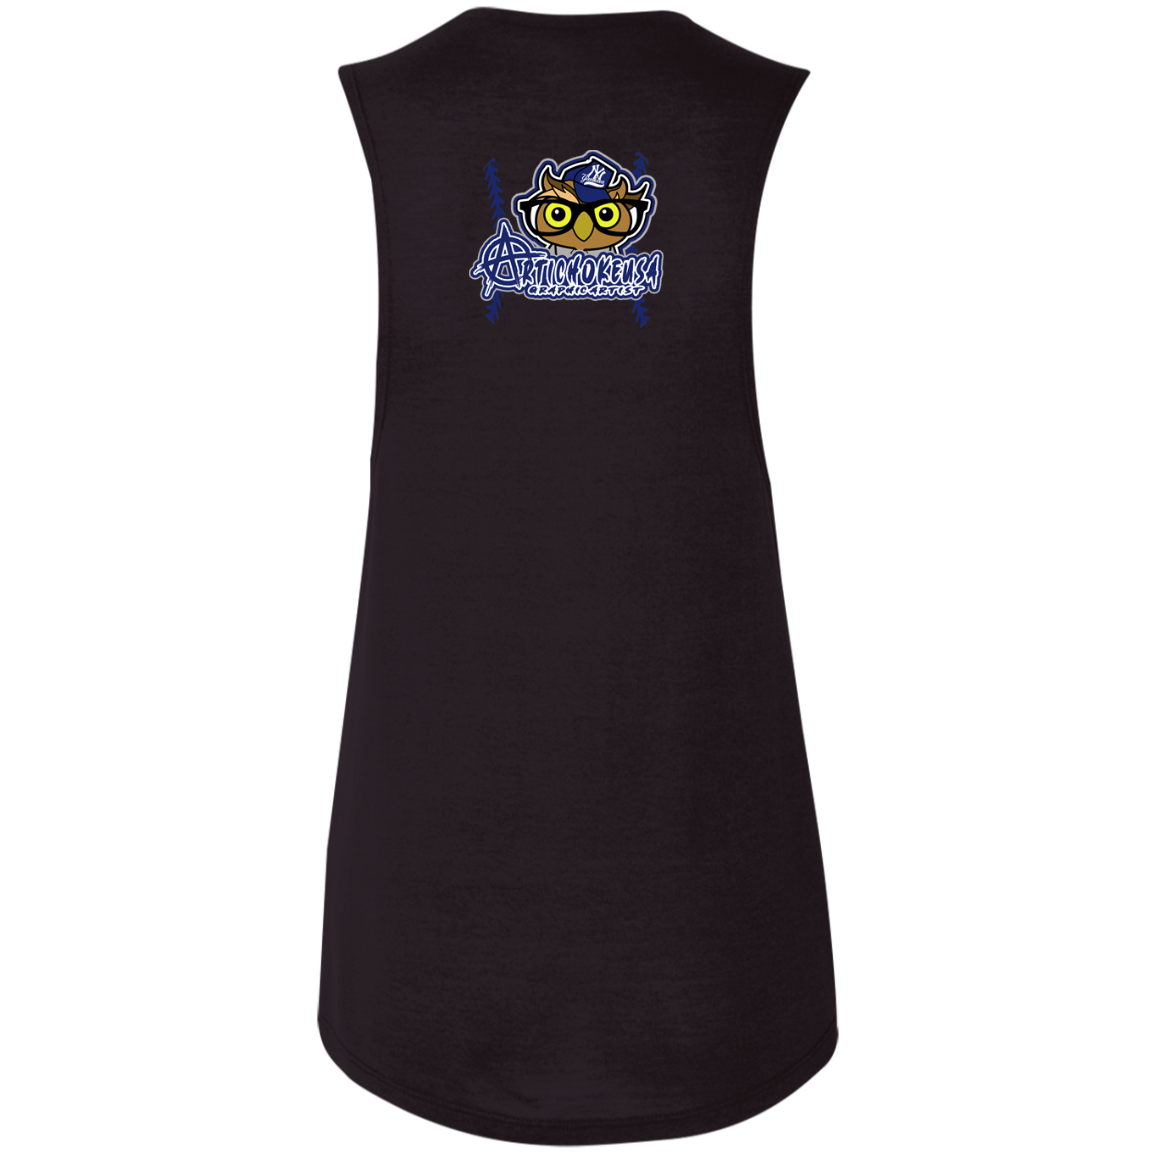 ArtichokeUSA Character and Font design. New York Owl. NY Yankees Fan Art. Let's Create Your Own Team Design Today. Ladies' Flowy Muscle Tank